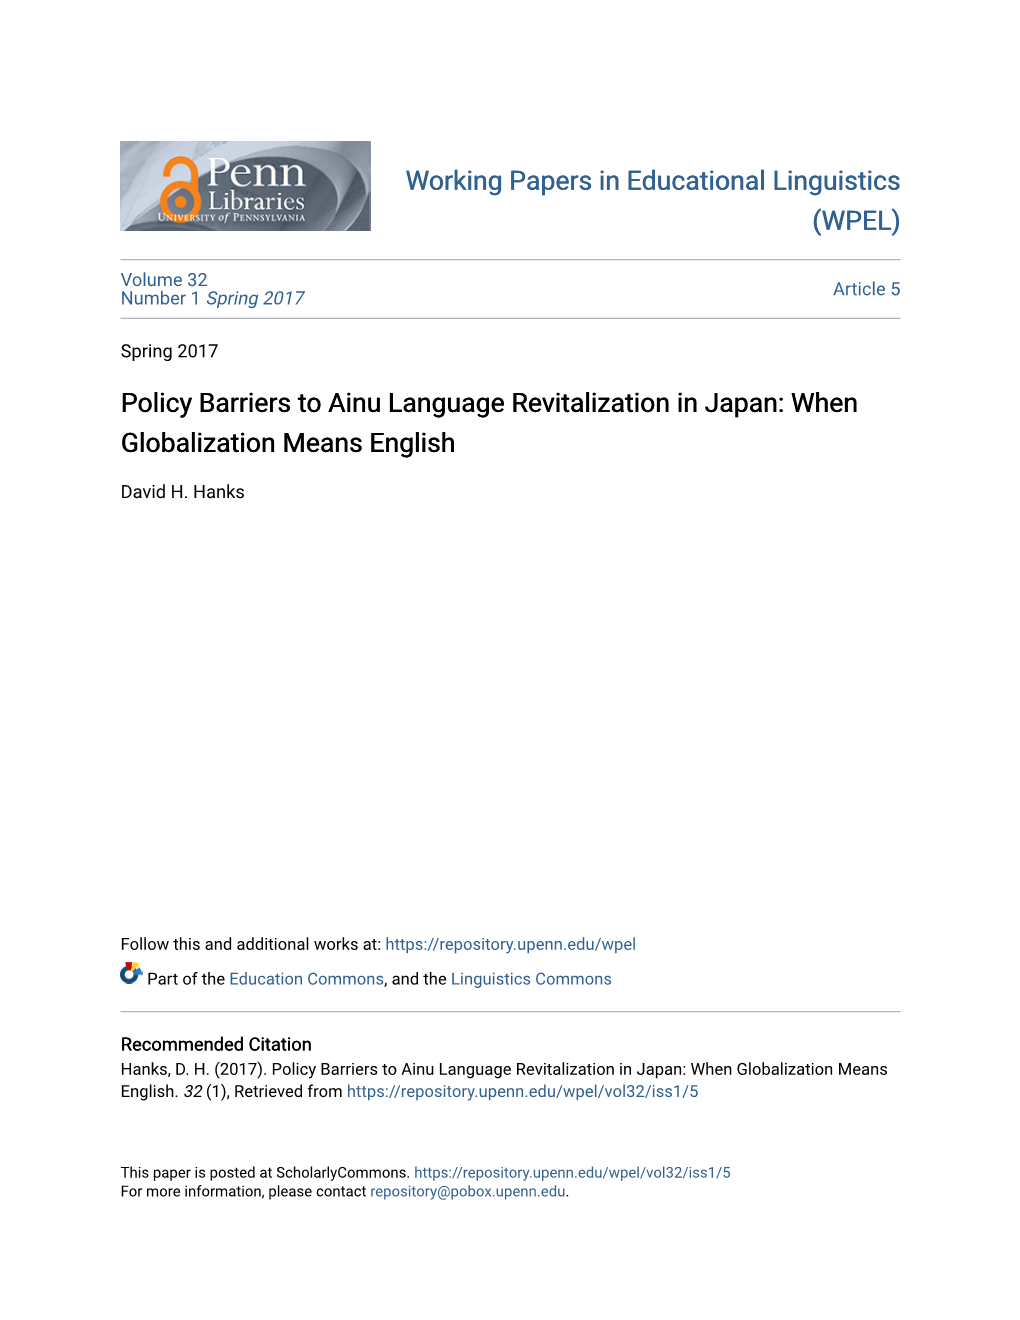 Policy Barriers to Ainu Language Revitalization in Japan: When Globalization Means English